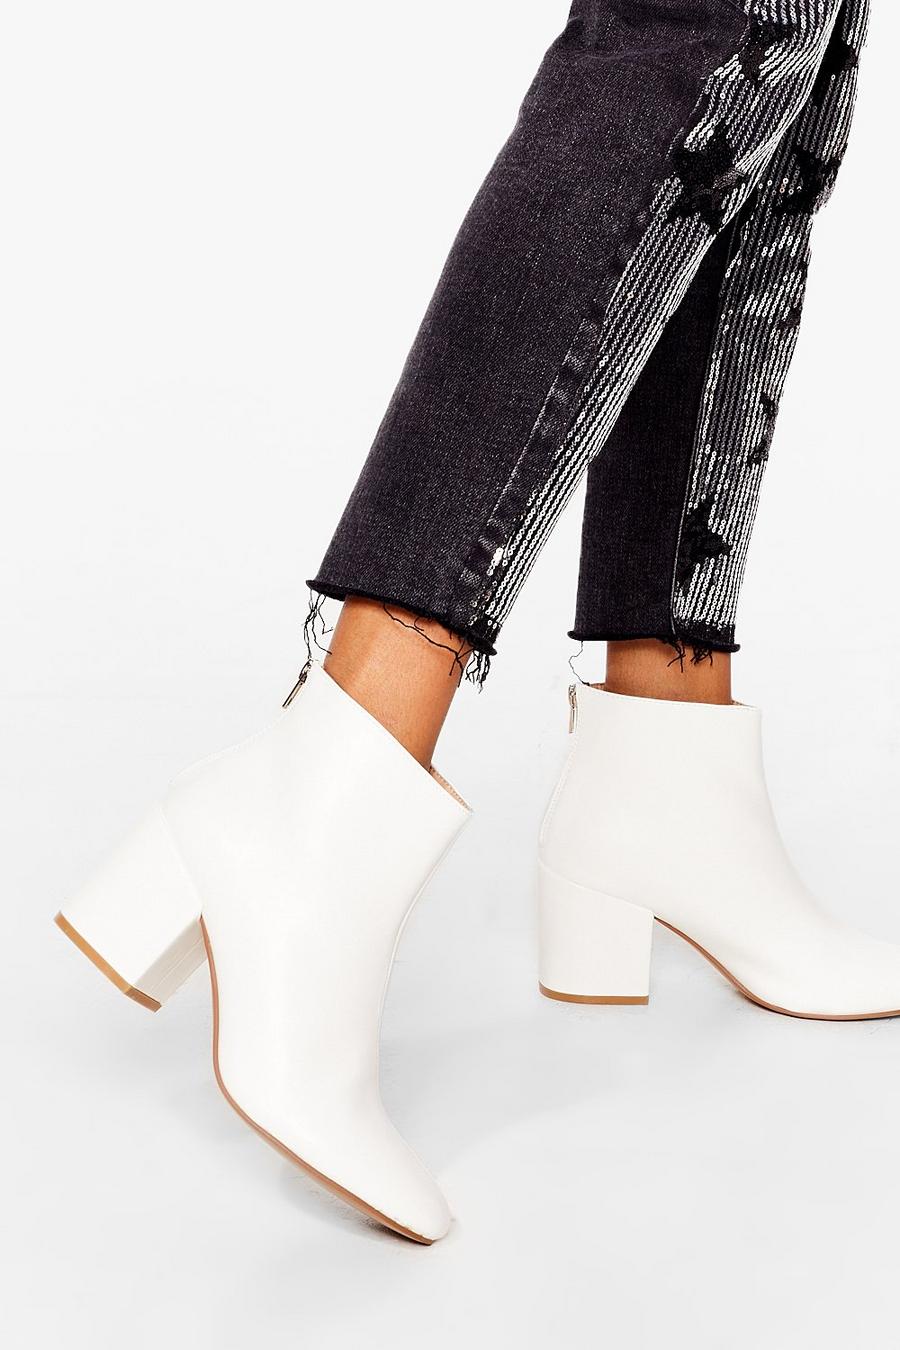 White Ankle Boots | vlr.eng.br